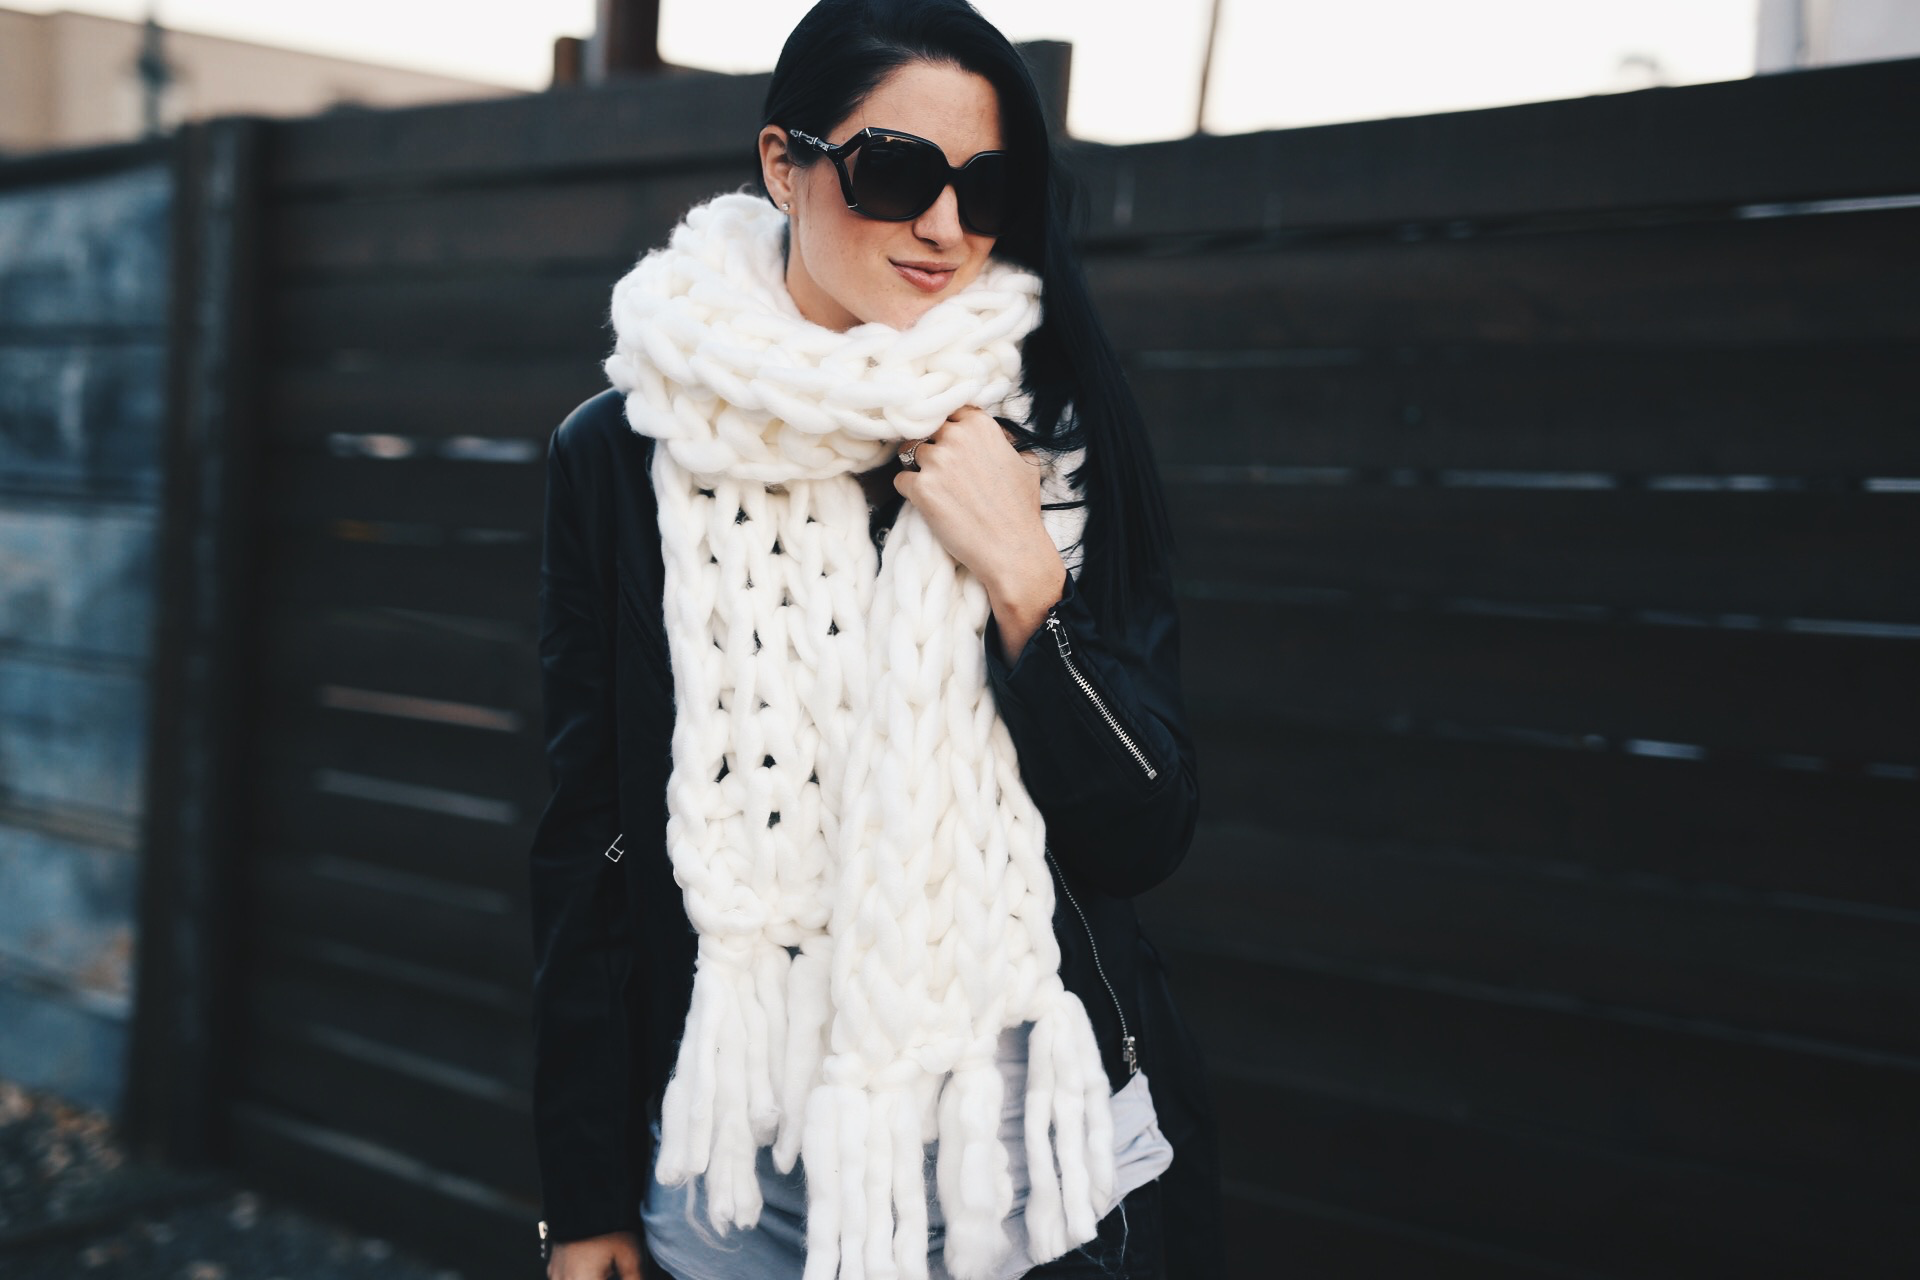 Ivory Chunky Knit Scarf | how to style a chunky knit scarf | how to wear a chunky knit scarf | chunky knit scarf style tips | fall scarves | scarves for fall and winter | fall fashion tips | fall outfit ideas | fall style tips | what to wear for fall | cool weather fashion | fashion for fall | style tips for fall | outfit ideas for fall || Dressed to Kill  #chunkyscarf #knitscarf #scarvesforwomen 